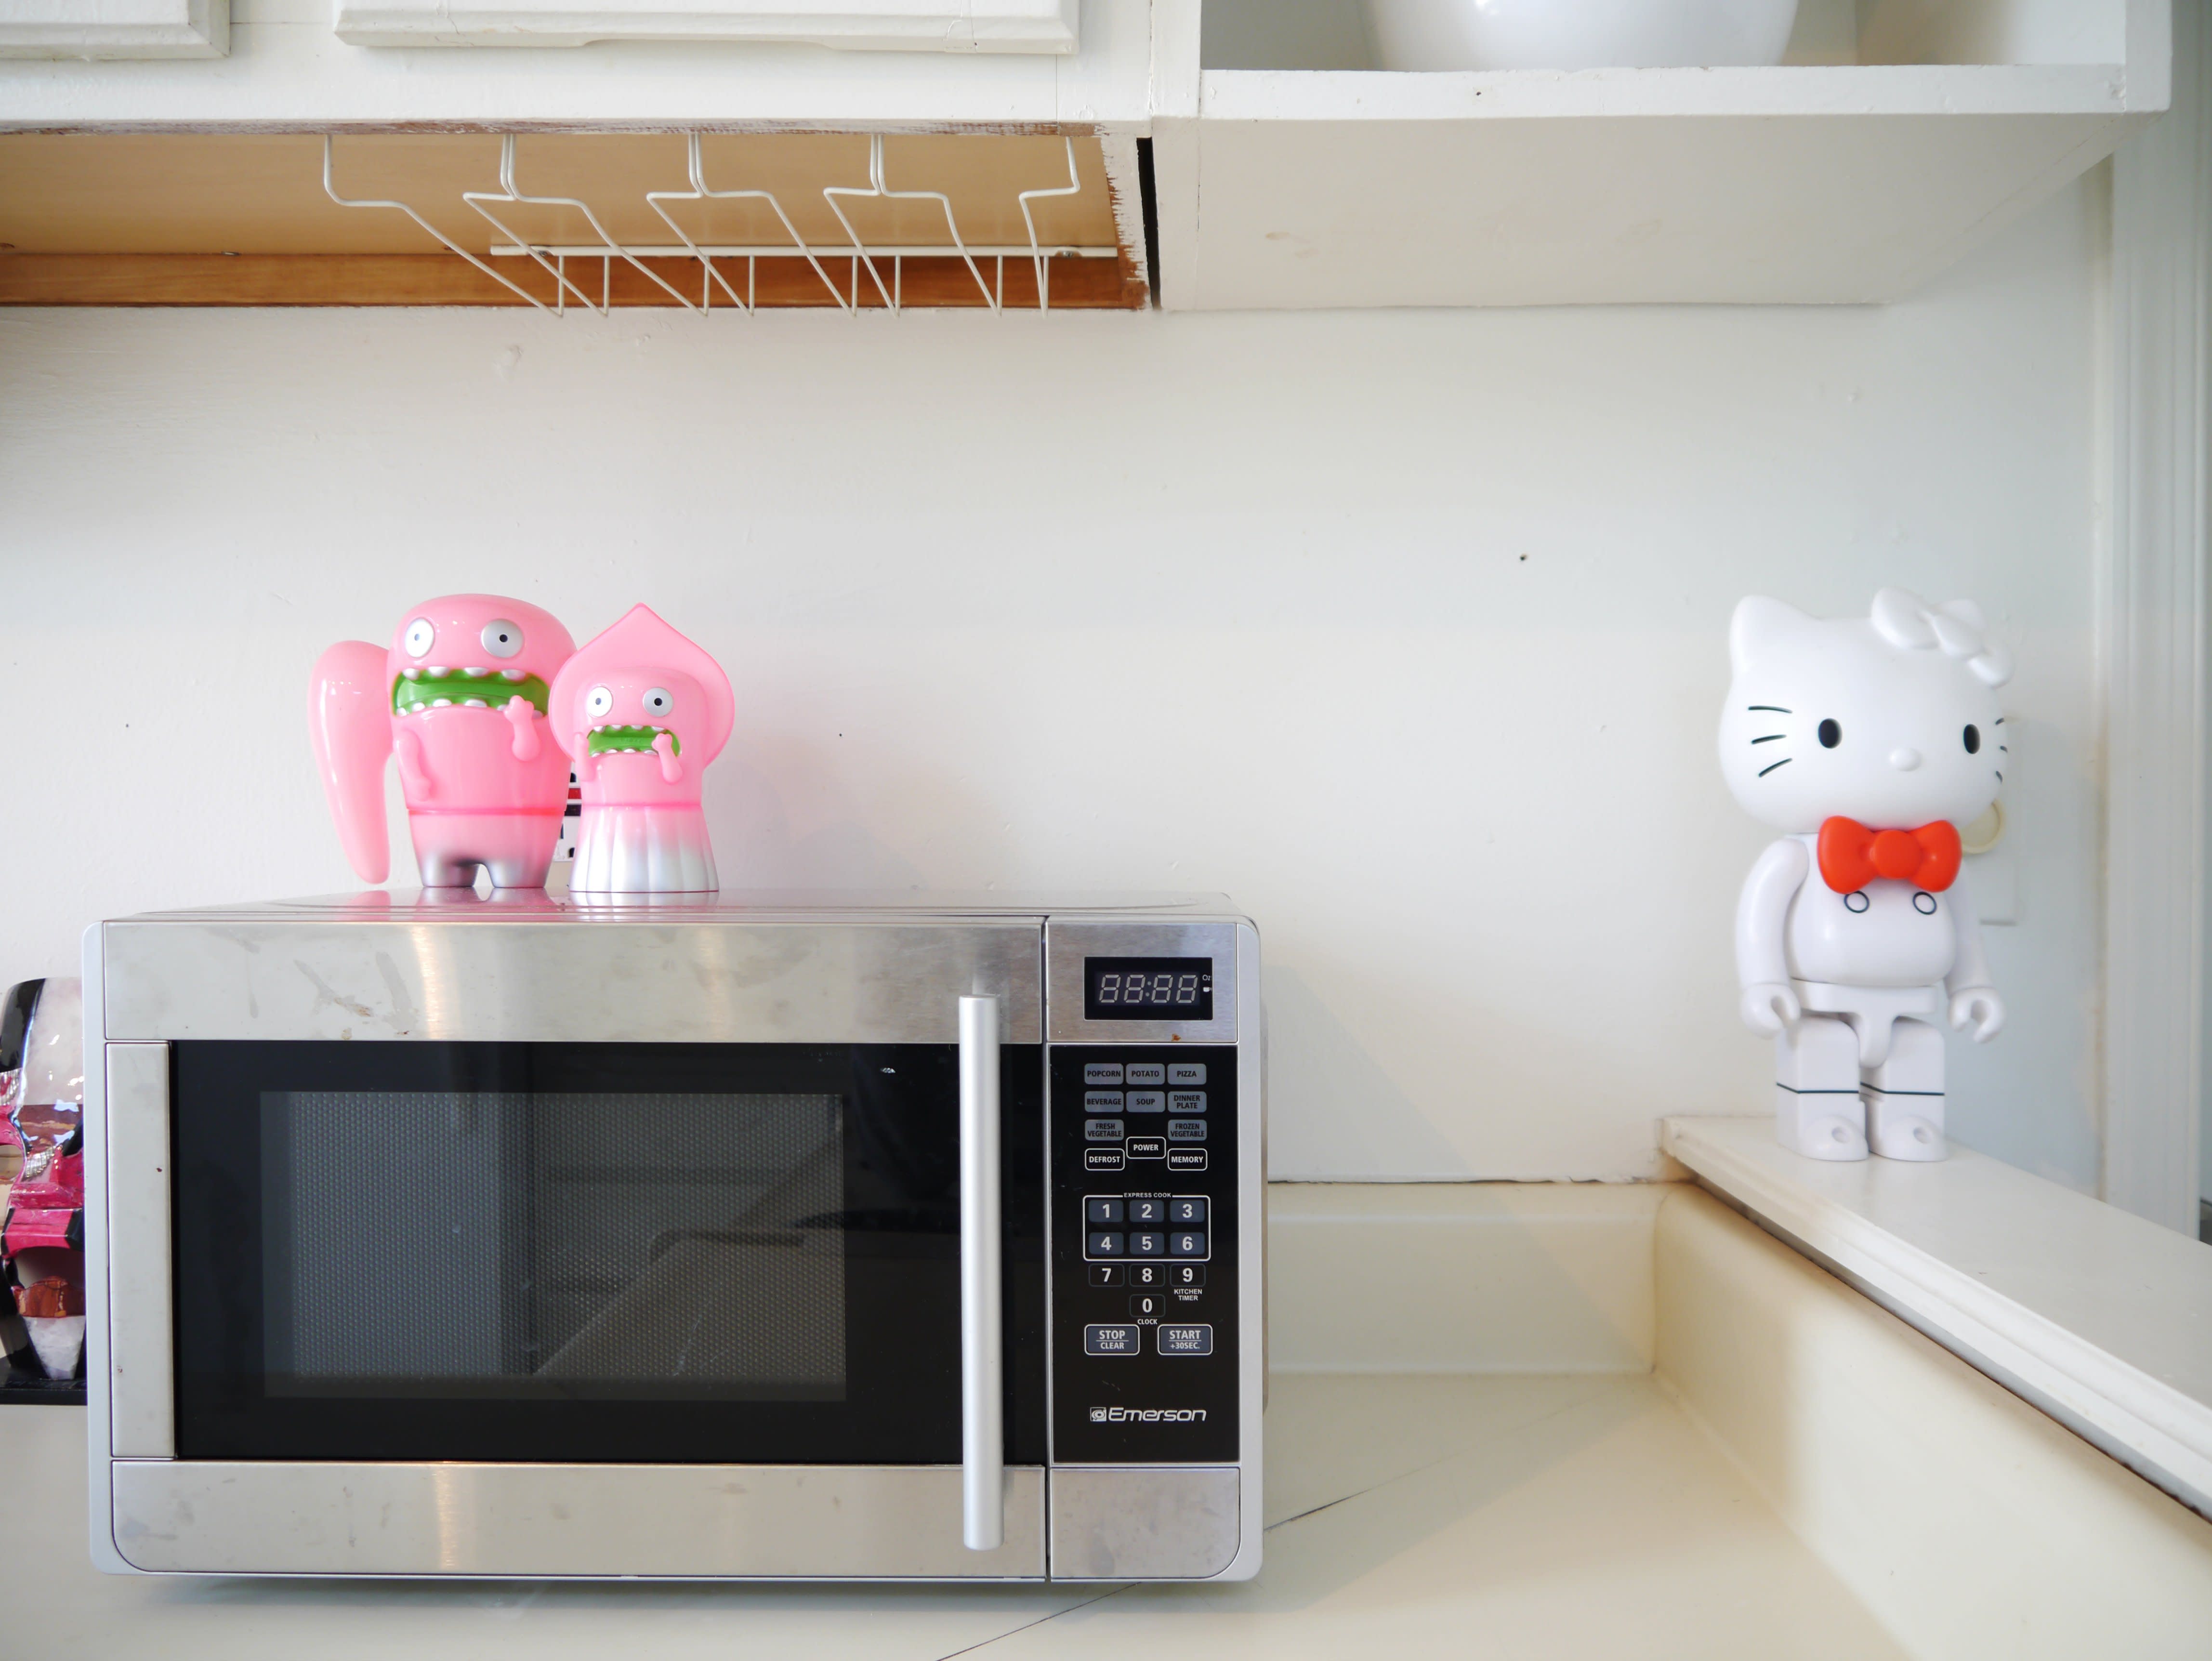 Microwave Ovens FAQ - 5 Things You Need to Know